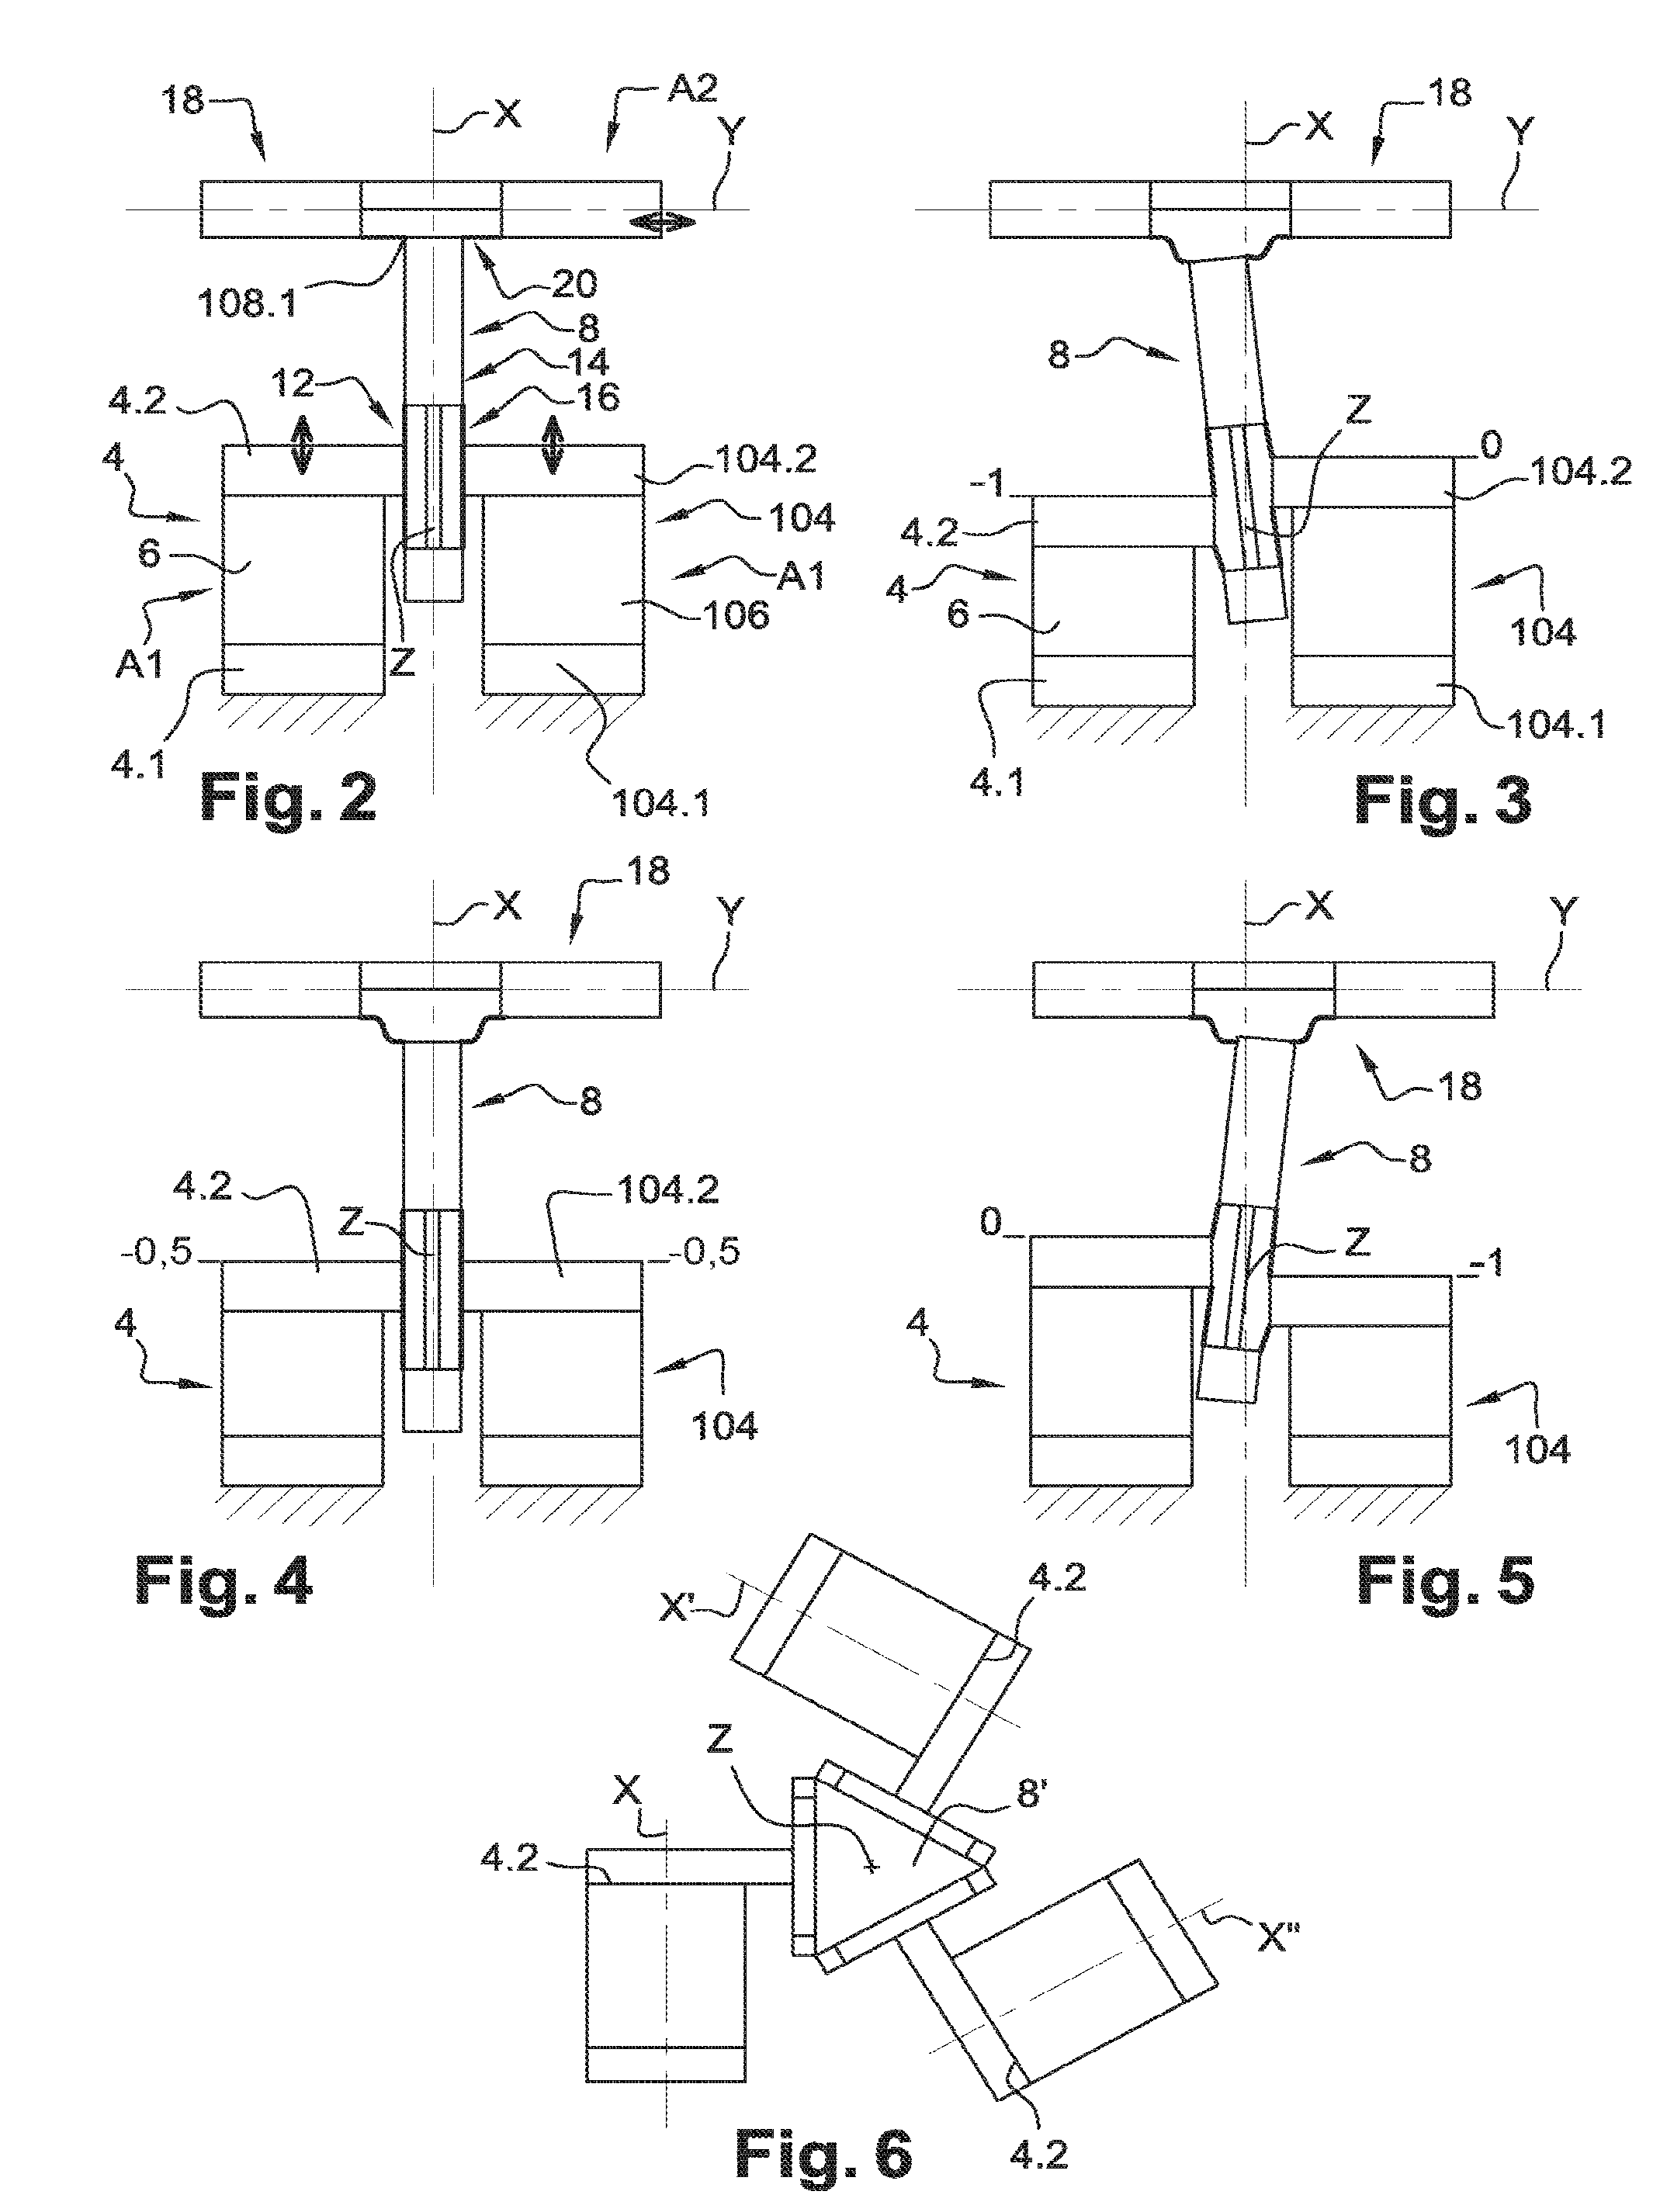 Device for transforming an out-of-plane movement into an in-plane movement, and/or vice-versa